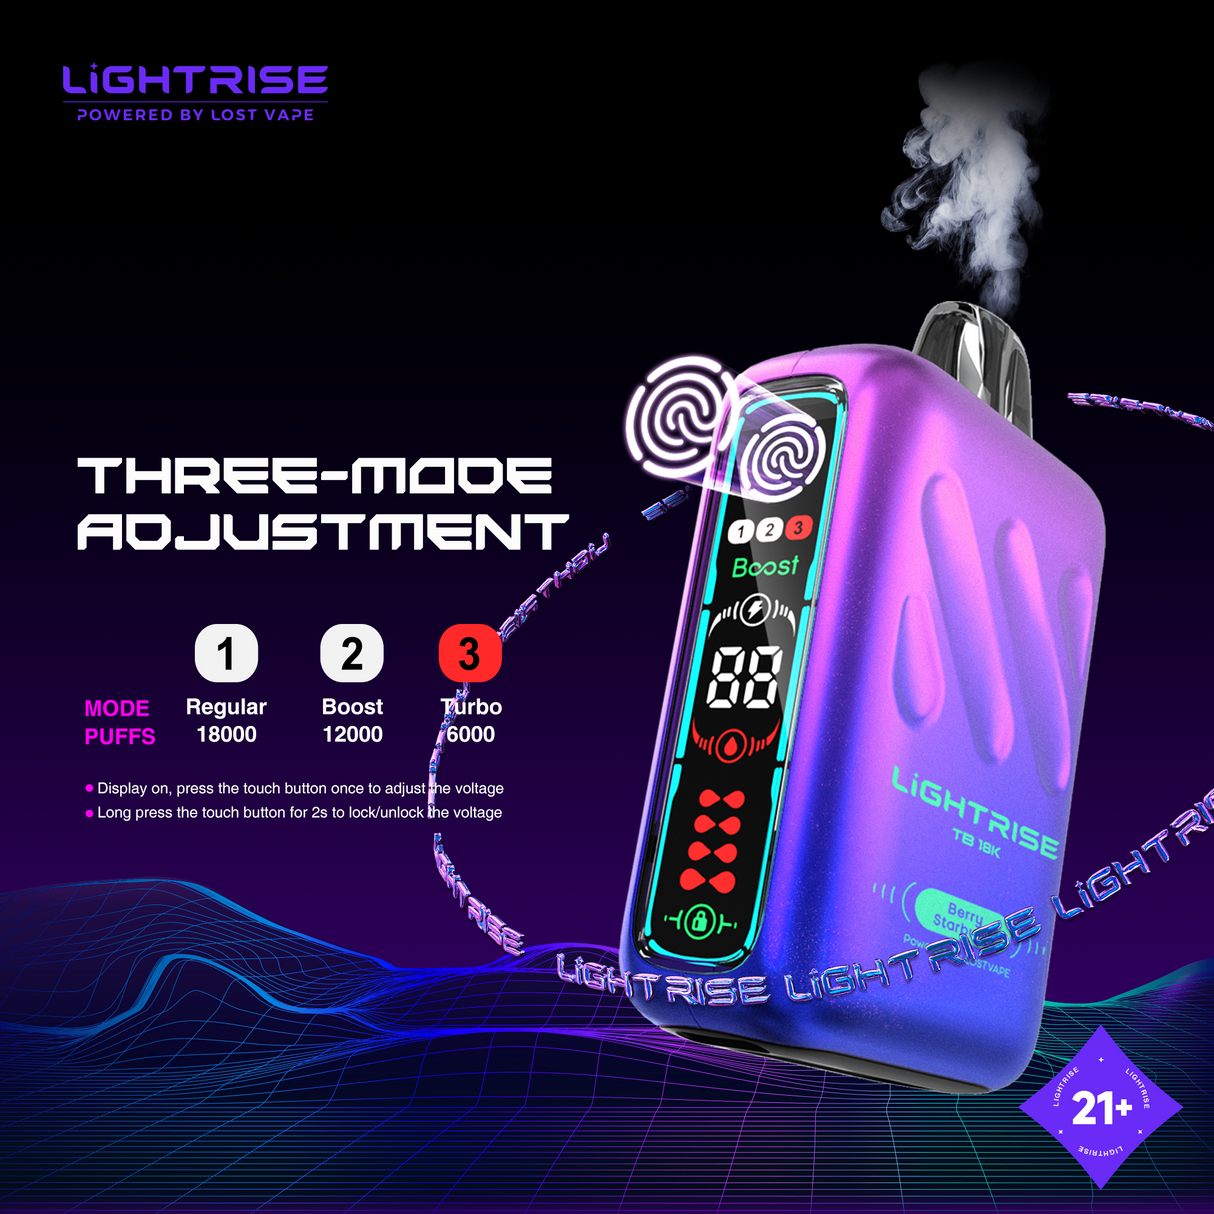 LIGHTRISE TB 18K Powered By Lost Vape details_2